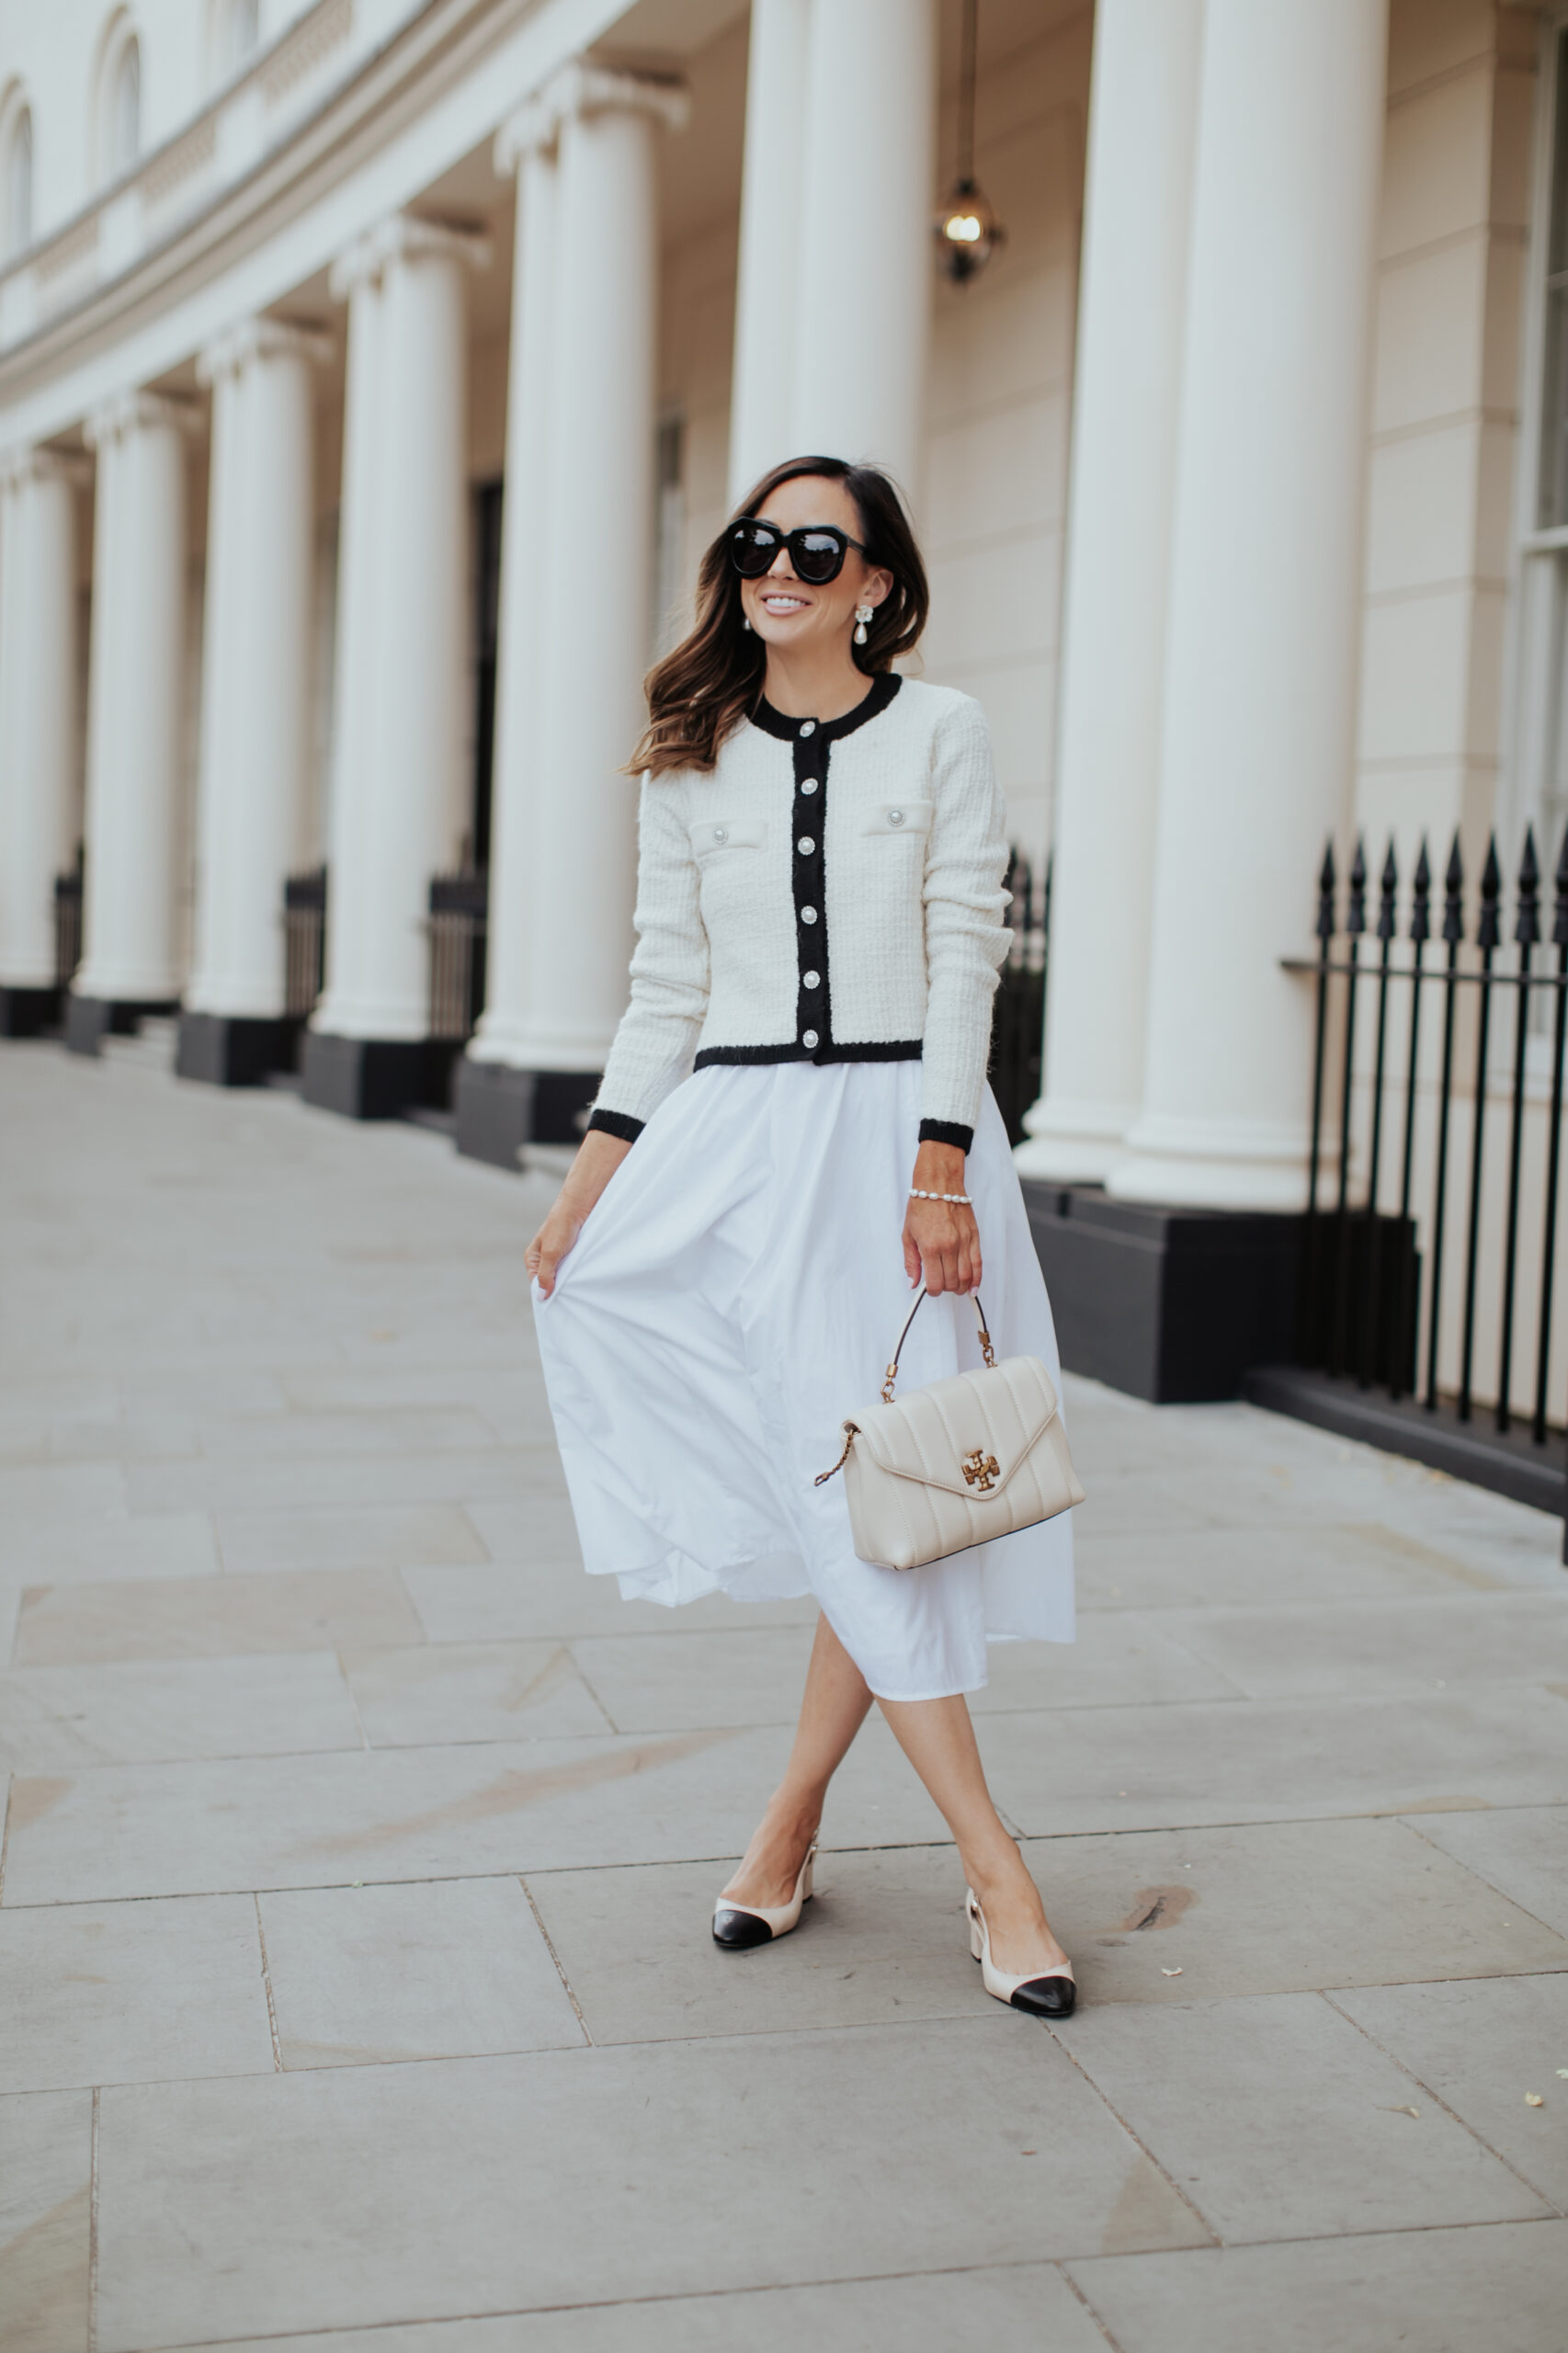 28 Stunning and Affordable Teacher Outfits You Need to Try